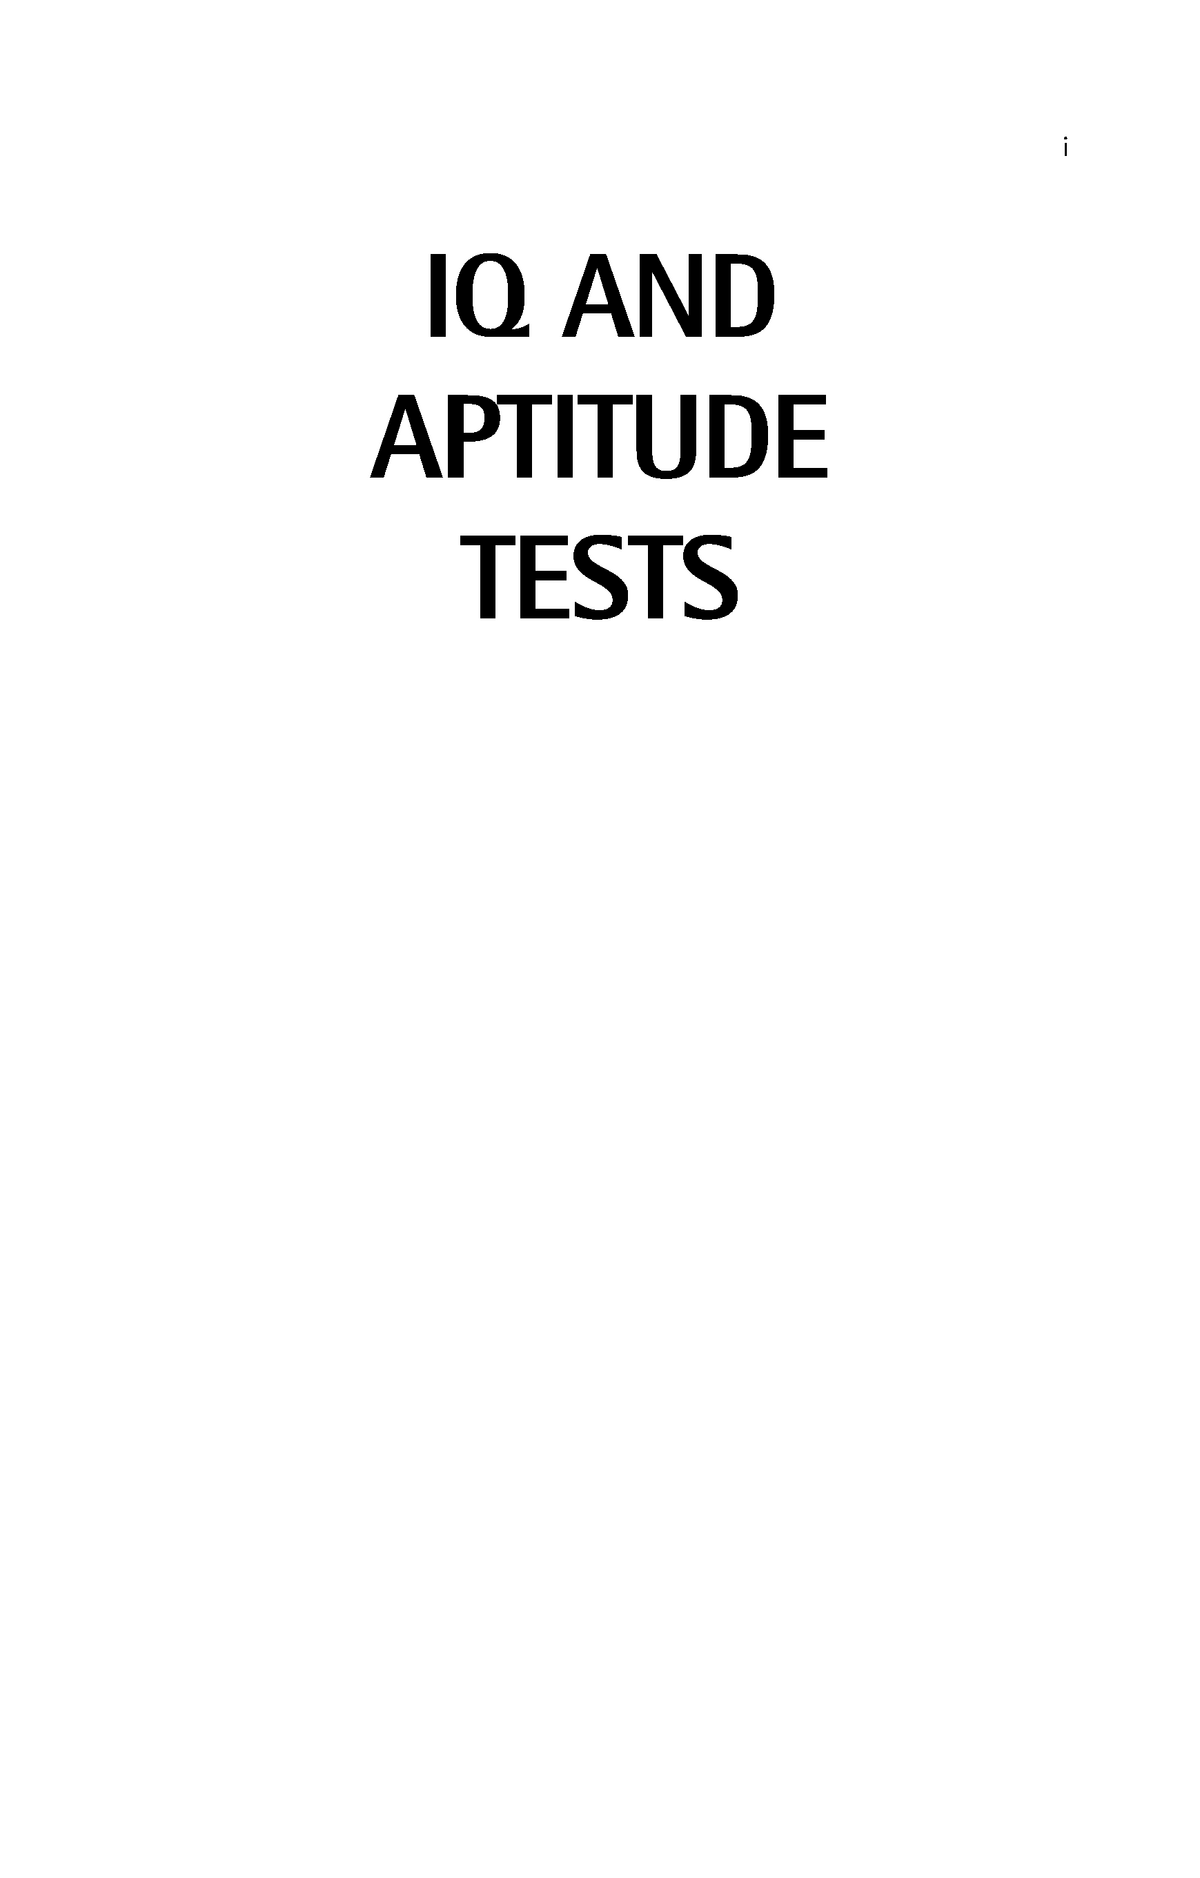 iq-and-aptitude-tests-assess-your-verbal-numerical-and-spatial-reasoning-skills-by-philip